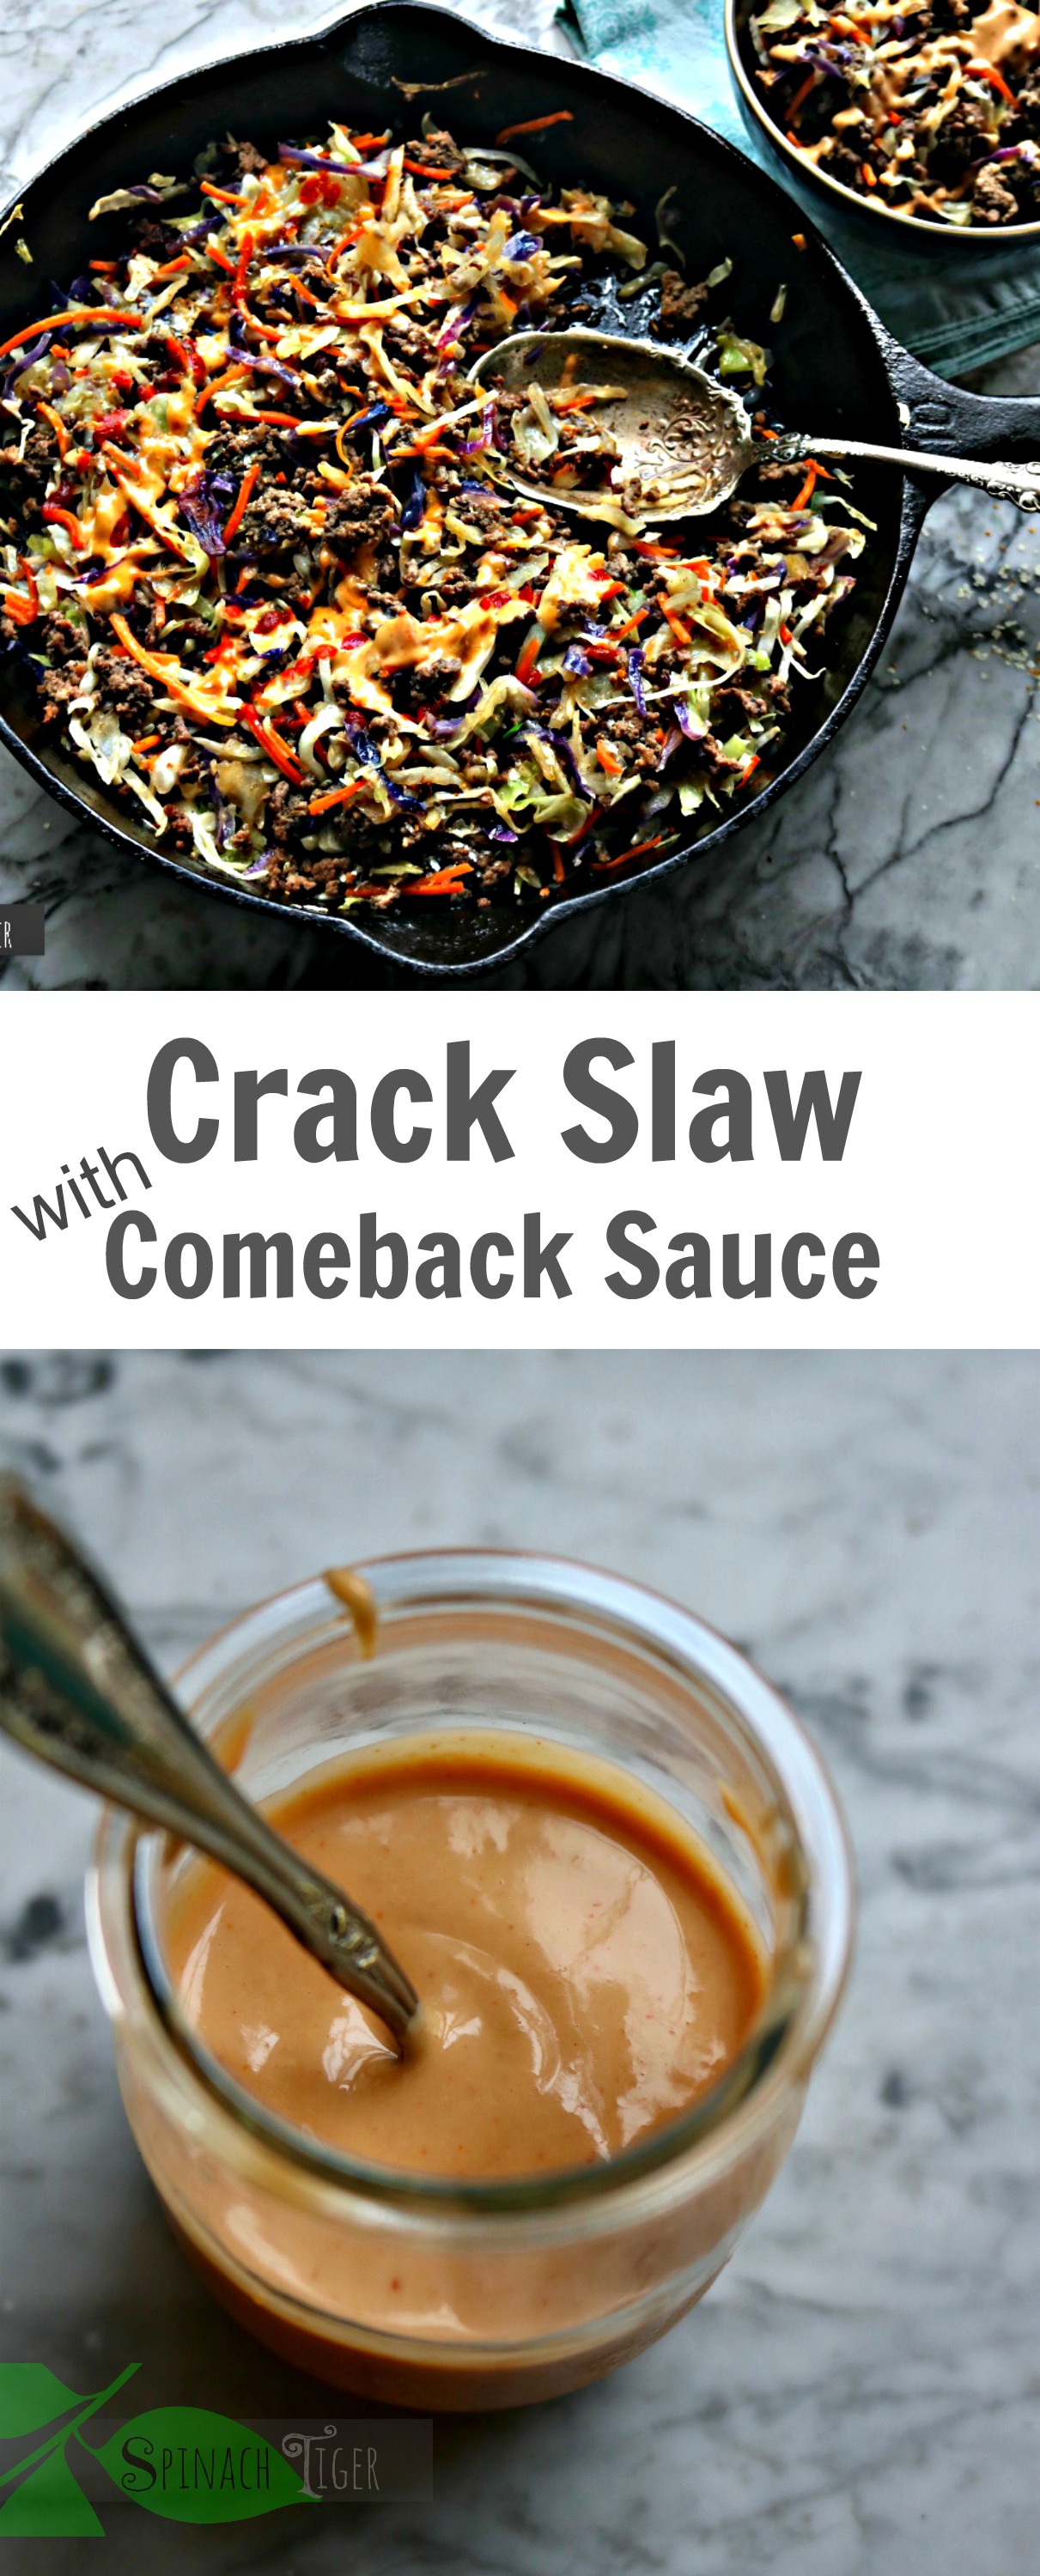 Crack slaw with three ingredient come back sauce recipe from Spinach Tiger